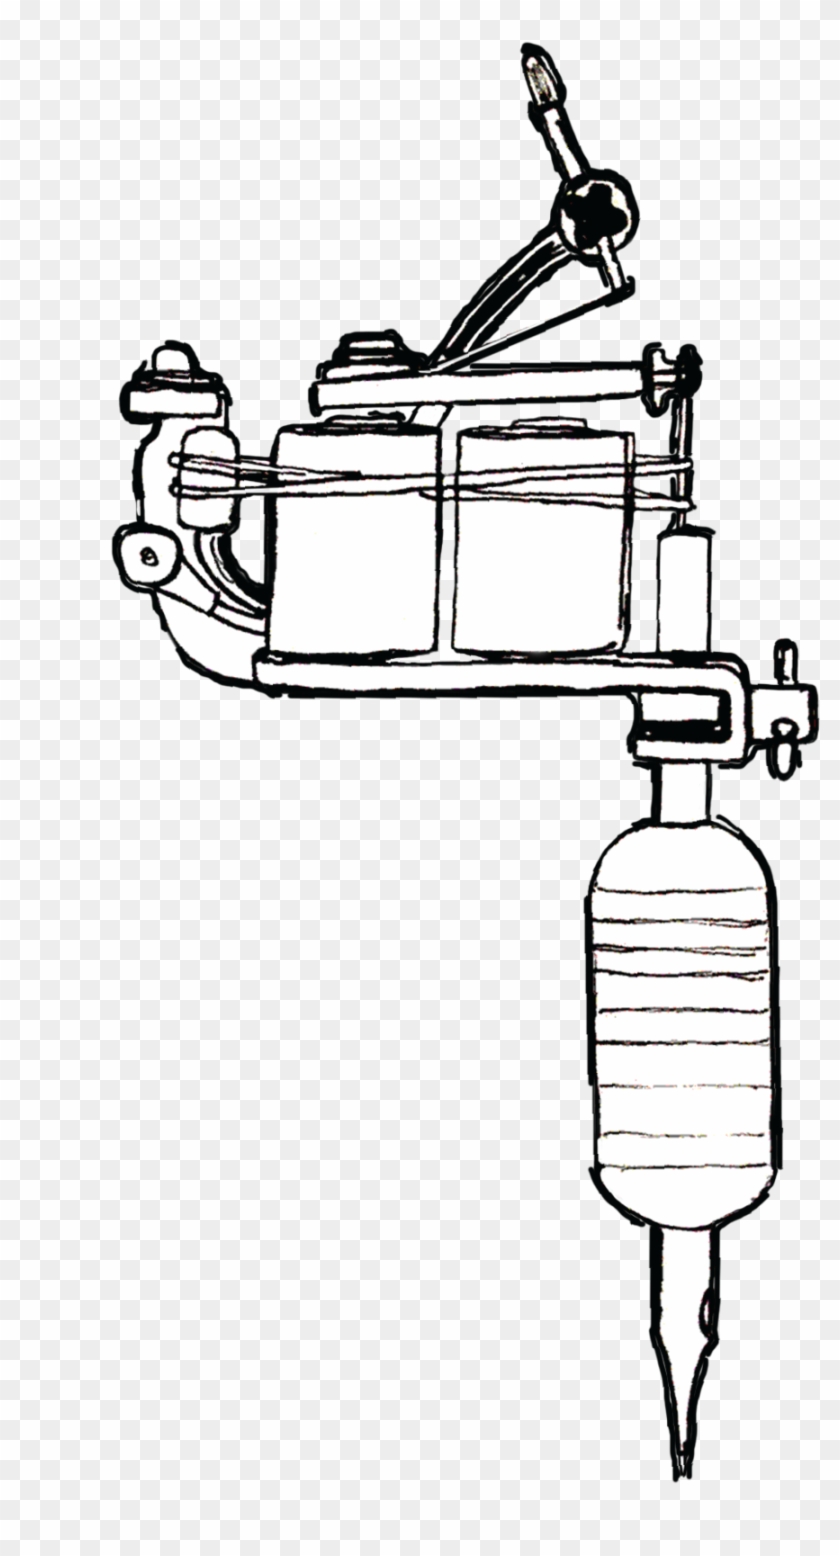 Tattoo Machine Drawing Png Go Back  Gallery For   Mac 11 Gun Cartoon  Transparent PNG  394x400  Free Download on NicePNG